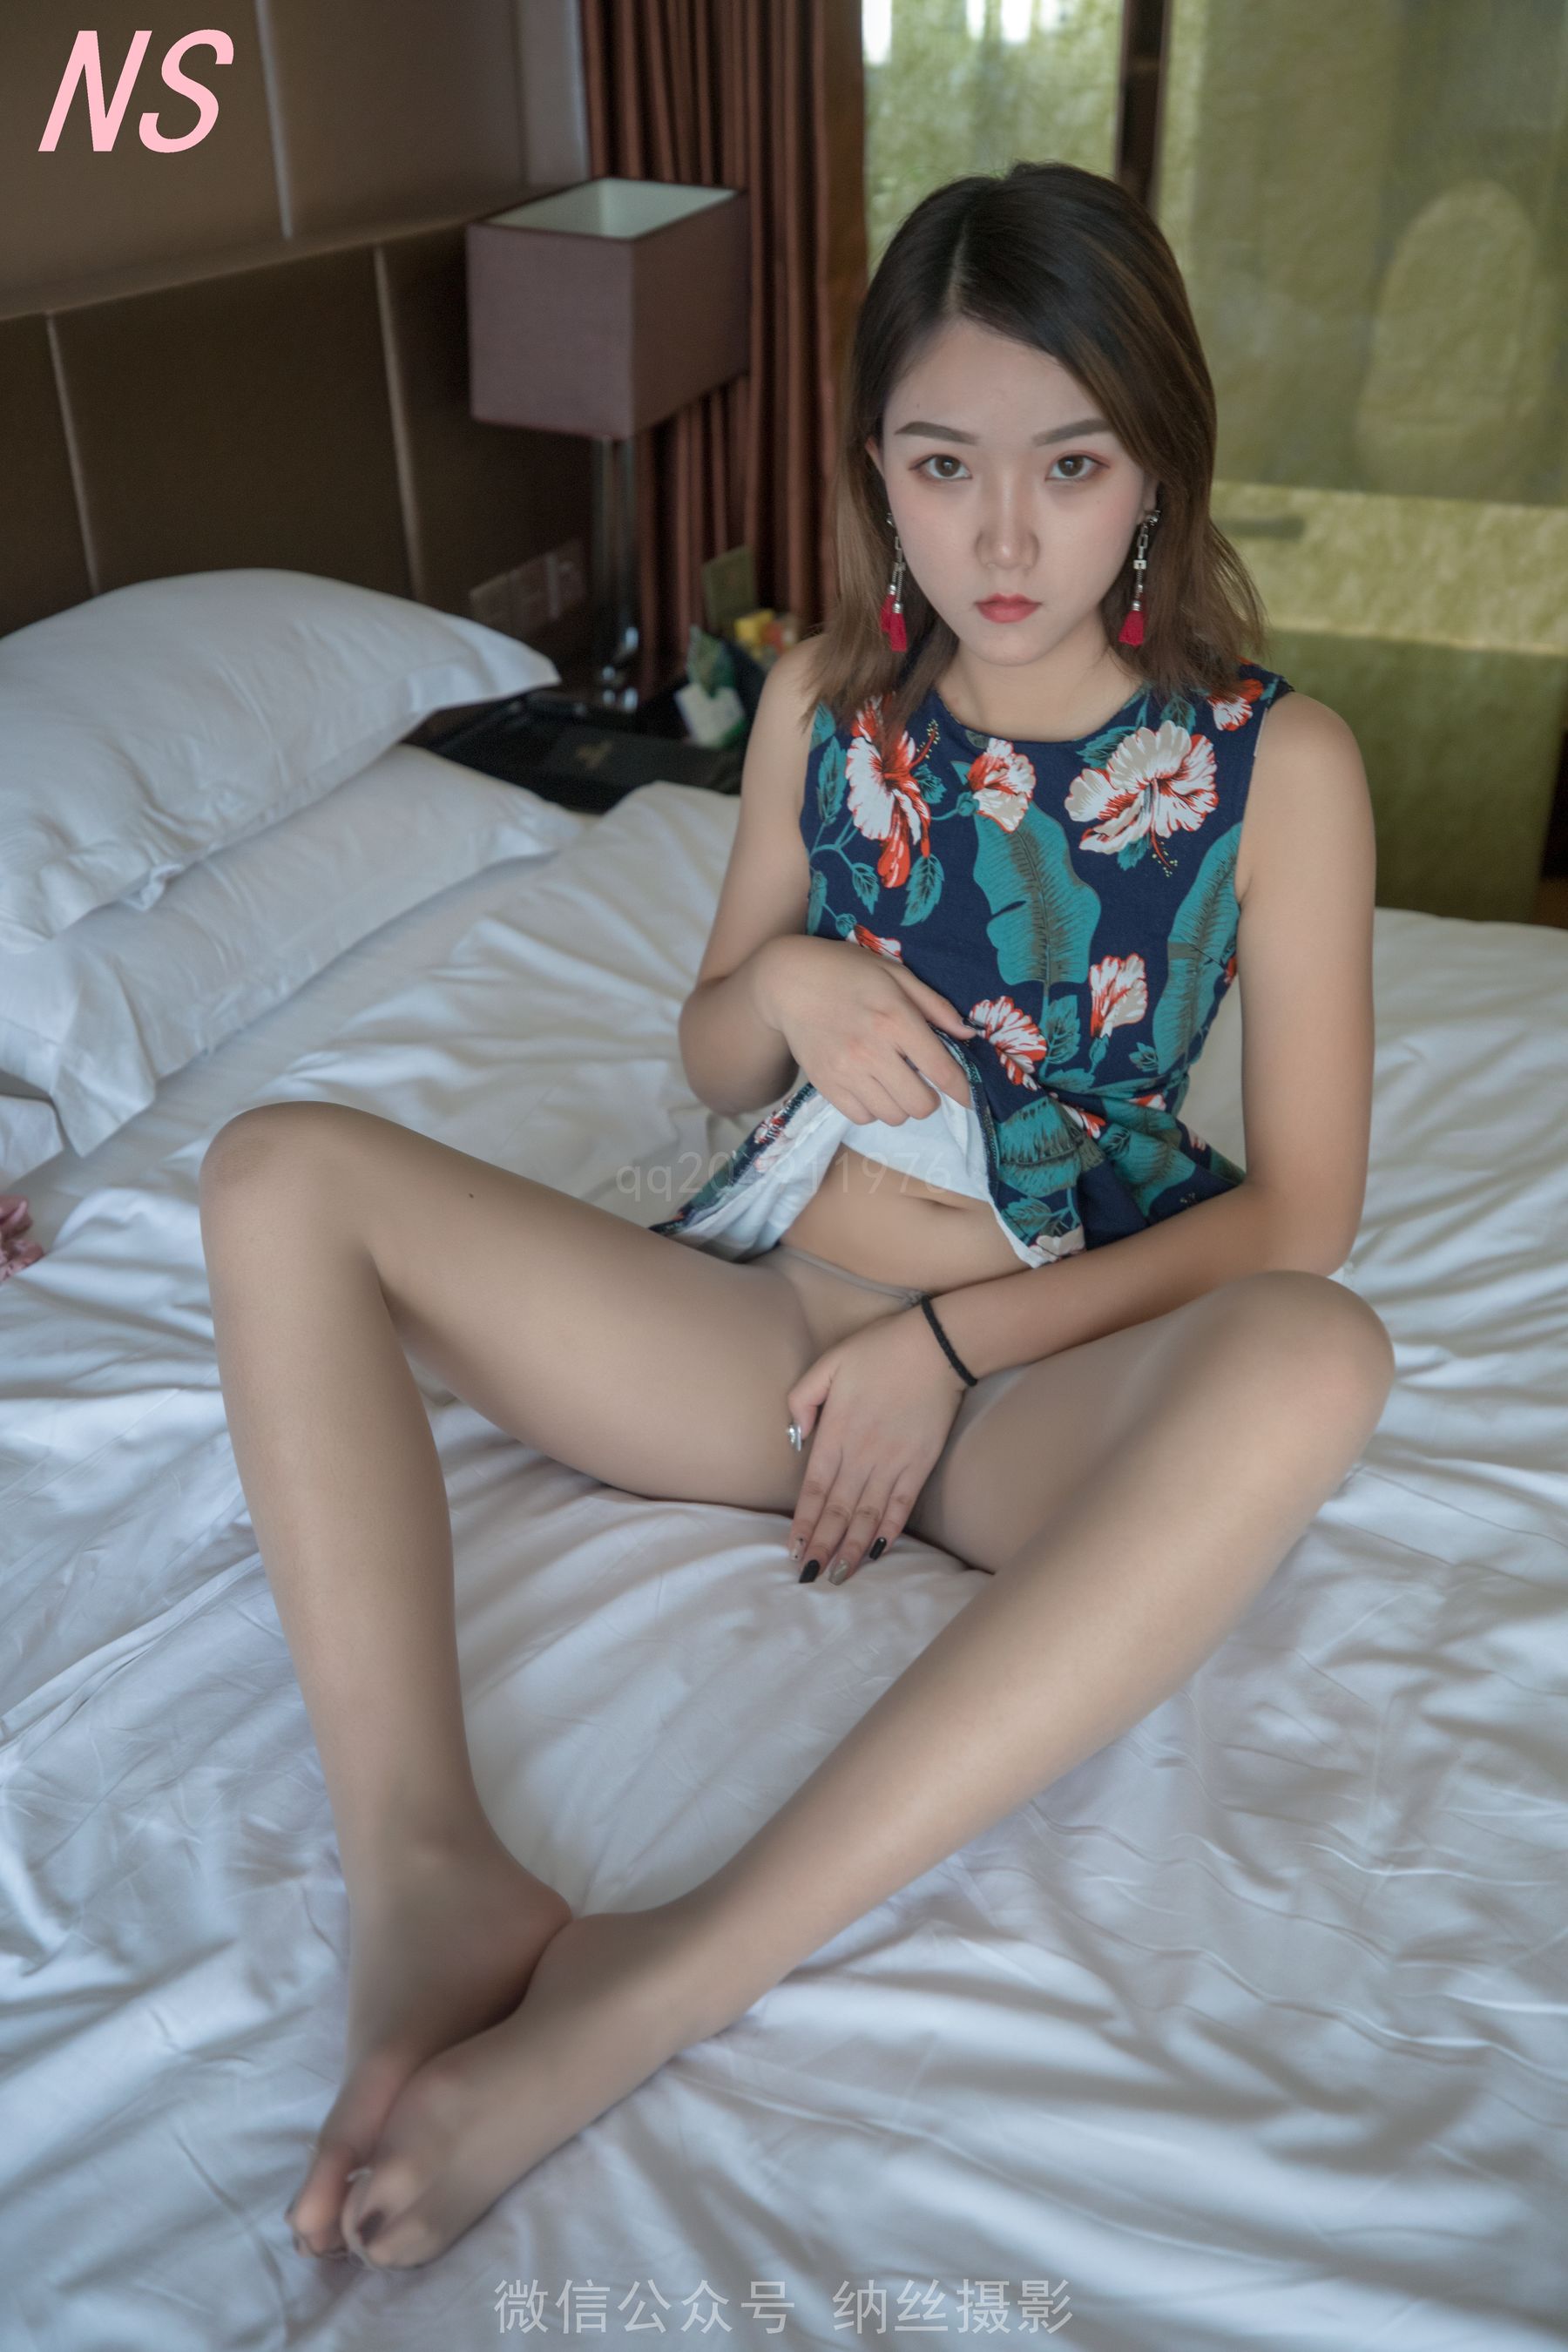 Yiyi “Super Beautiful Legs Seamless Stockings Tender Foot” [Nose Photography] Photo Collection